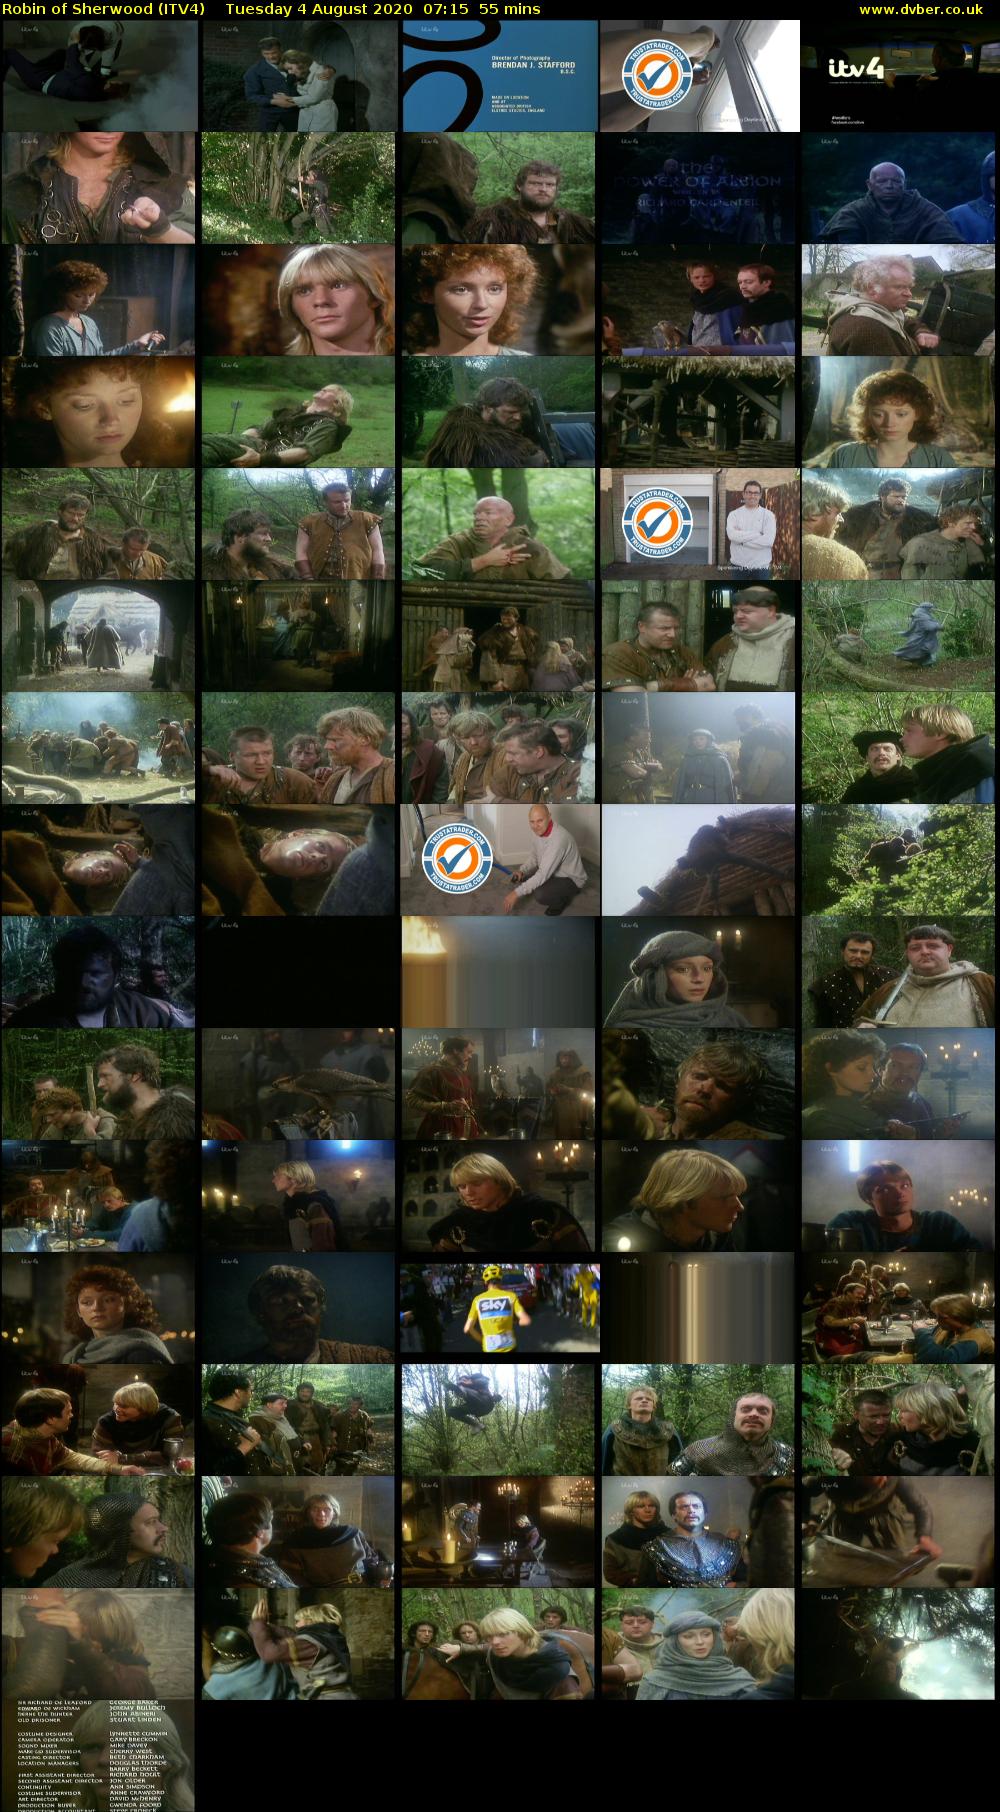 Robin of Sherwood (ITV4) Tuesday 4 August 2020 07:15 - 08:10